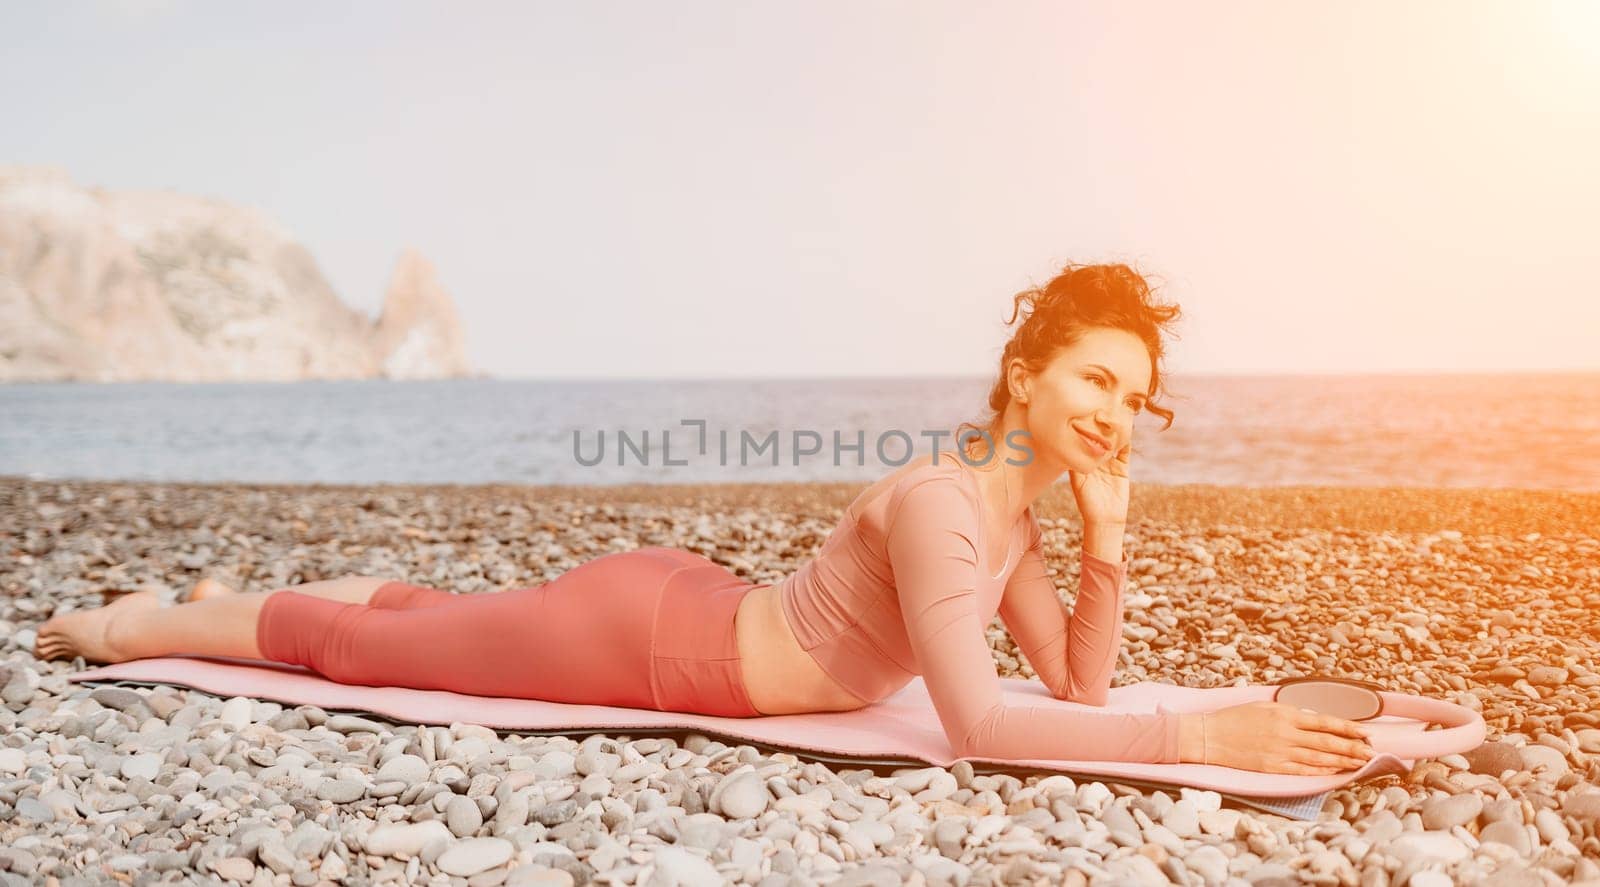 Middle aged well looking woman with black hair doing Pilates with the ring on the yoga mat near the sea on the pebble beach. Female fitness yoga concept. Healthy lifestyle, harmony and meditation.